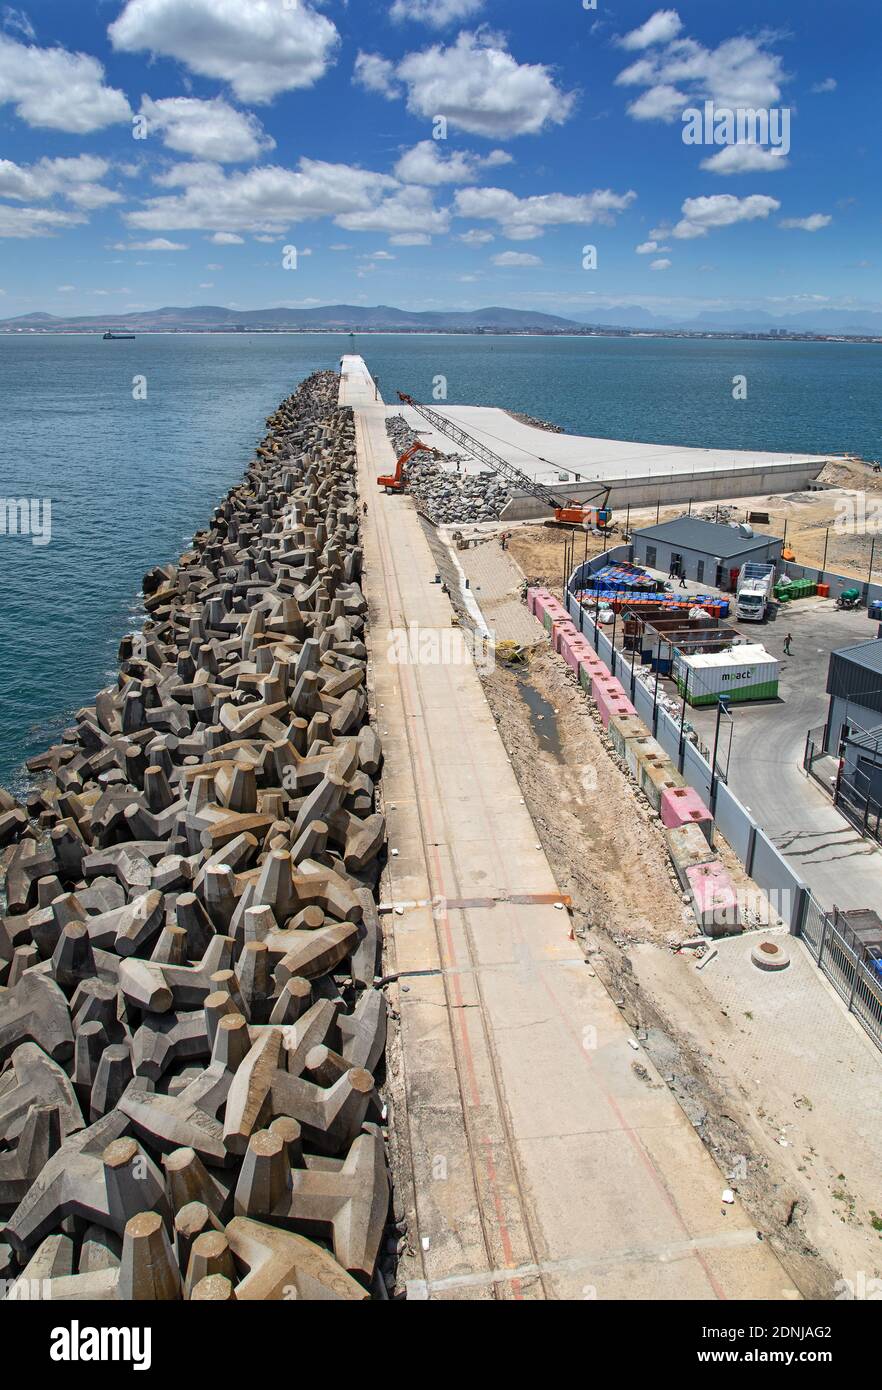 Cape Town, Western Cape / South Africa - 11/26/2020: Aerial photo of V&A Waterfront breakwater Stock Photo